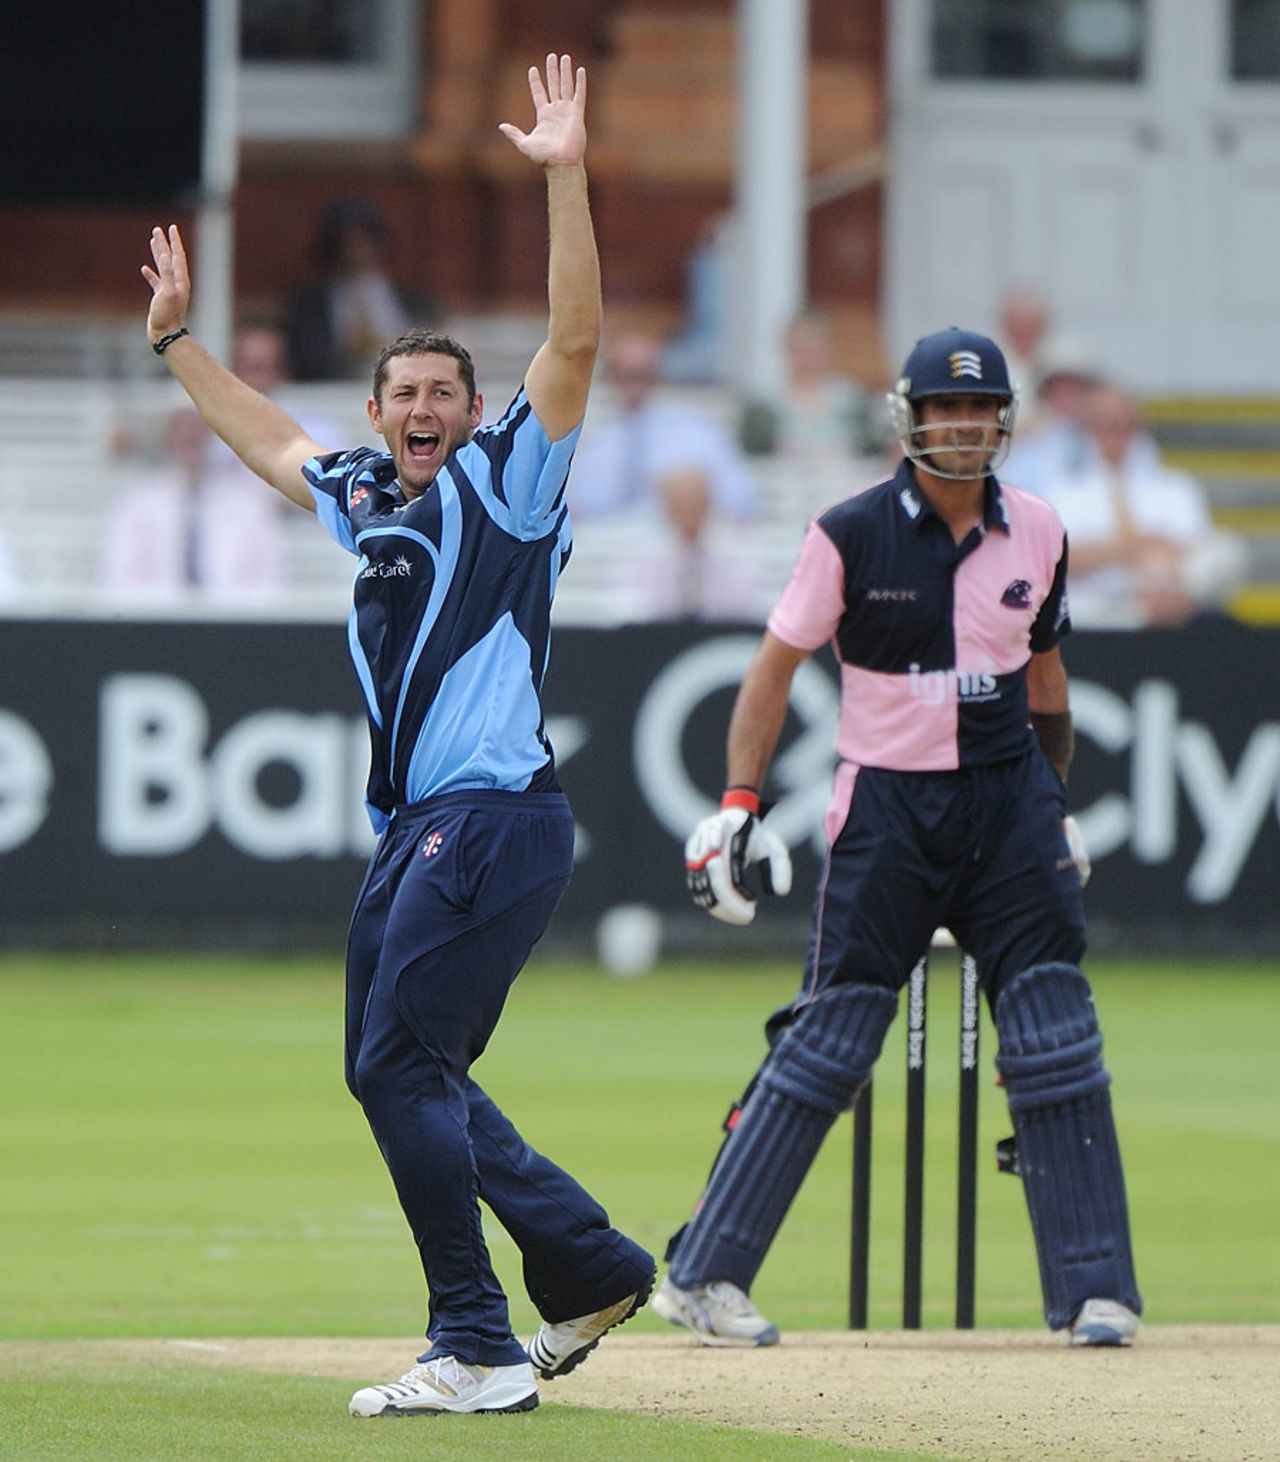 Tim Bresnan had Owais Shah out caught behind for 7, Middlesex v Yorkshire, Clydesdale Bank 40, Lord's, July 25, 2010